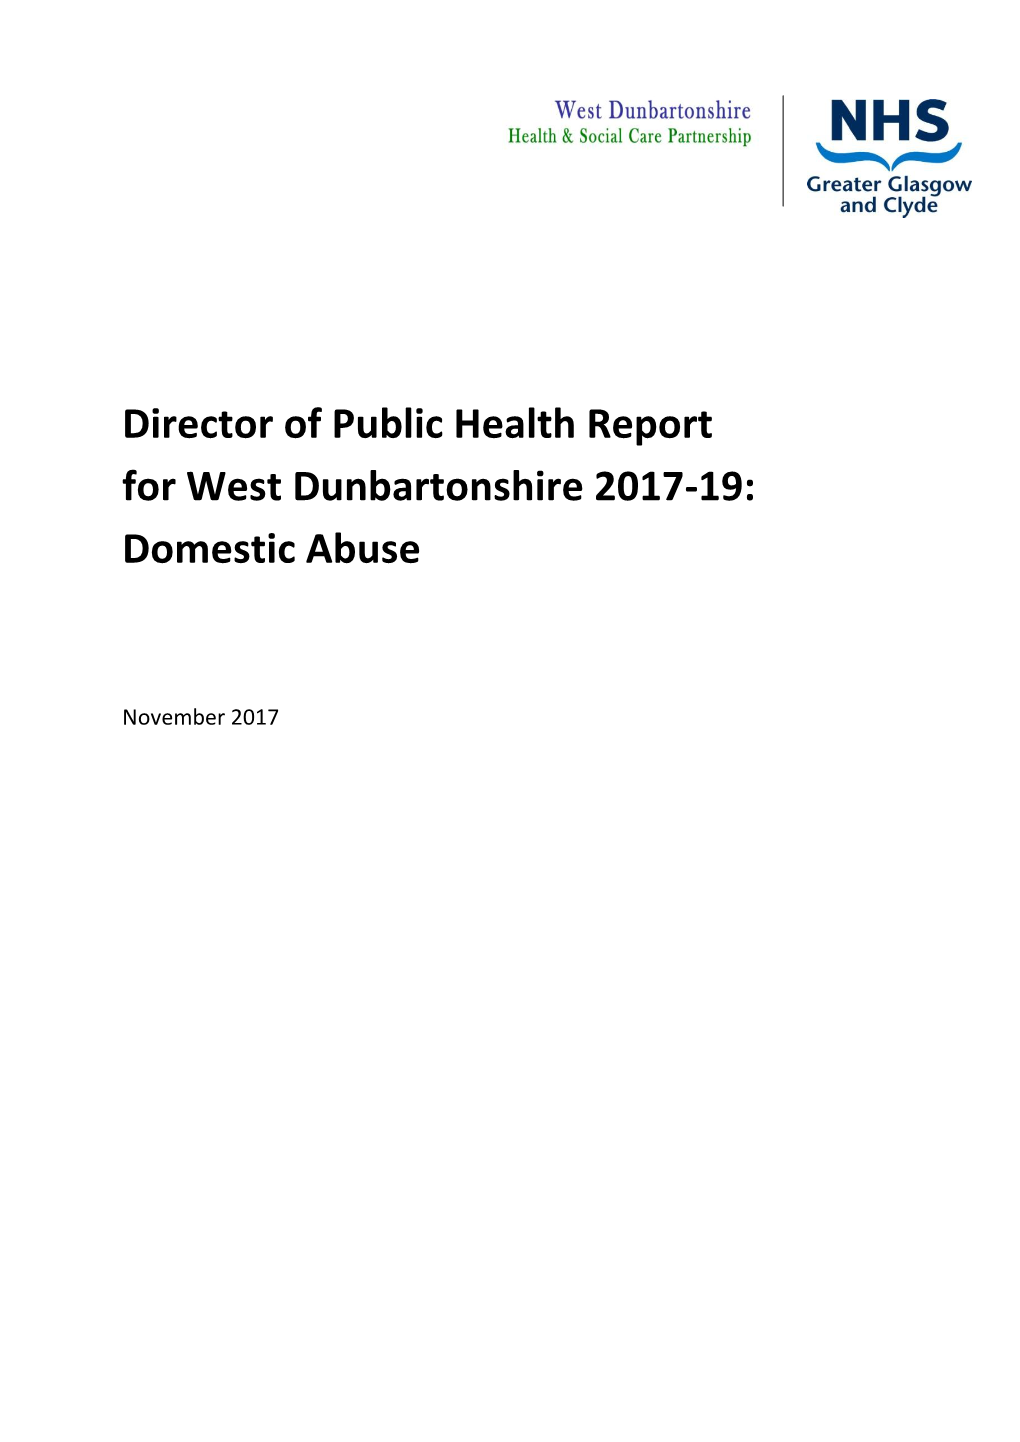 Director of Public Health Report for West Dunbartonshire 2017-19: Domestic Abuse